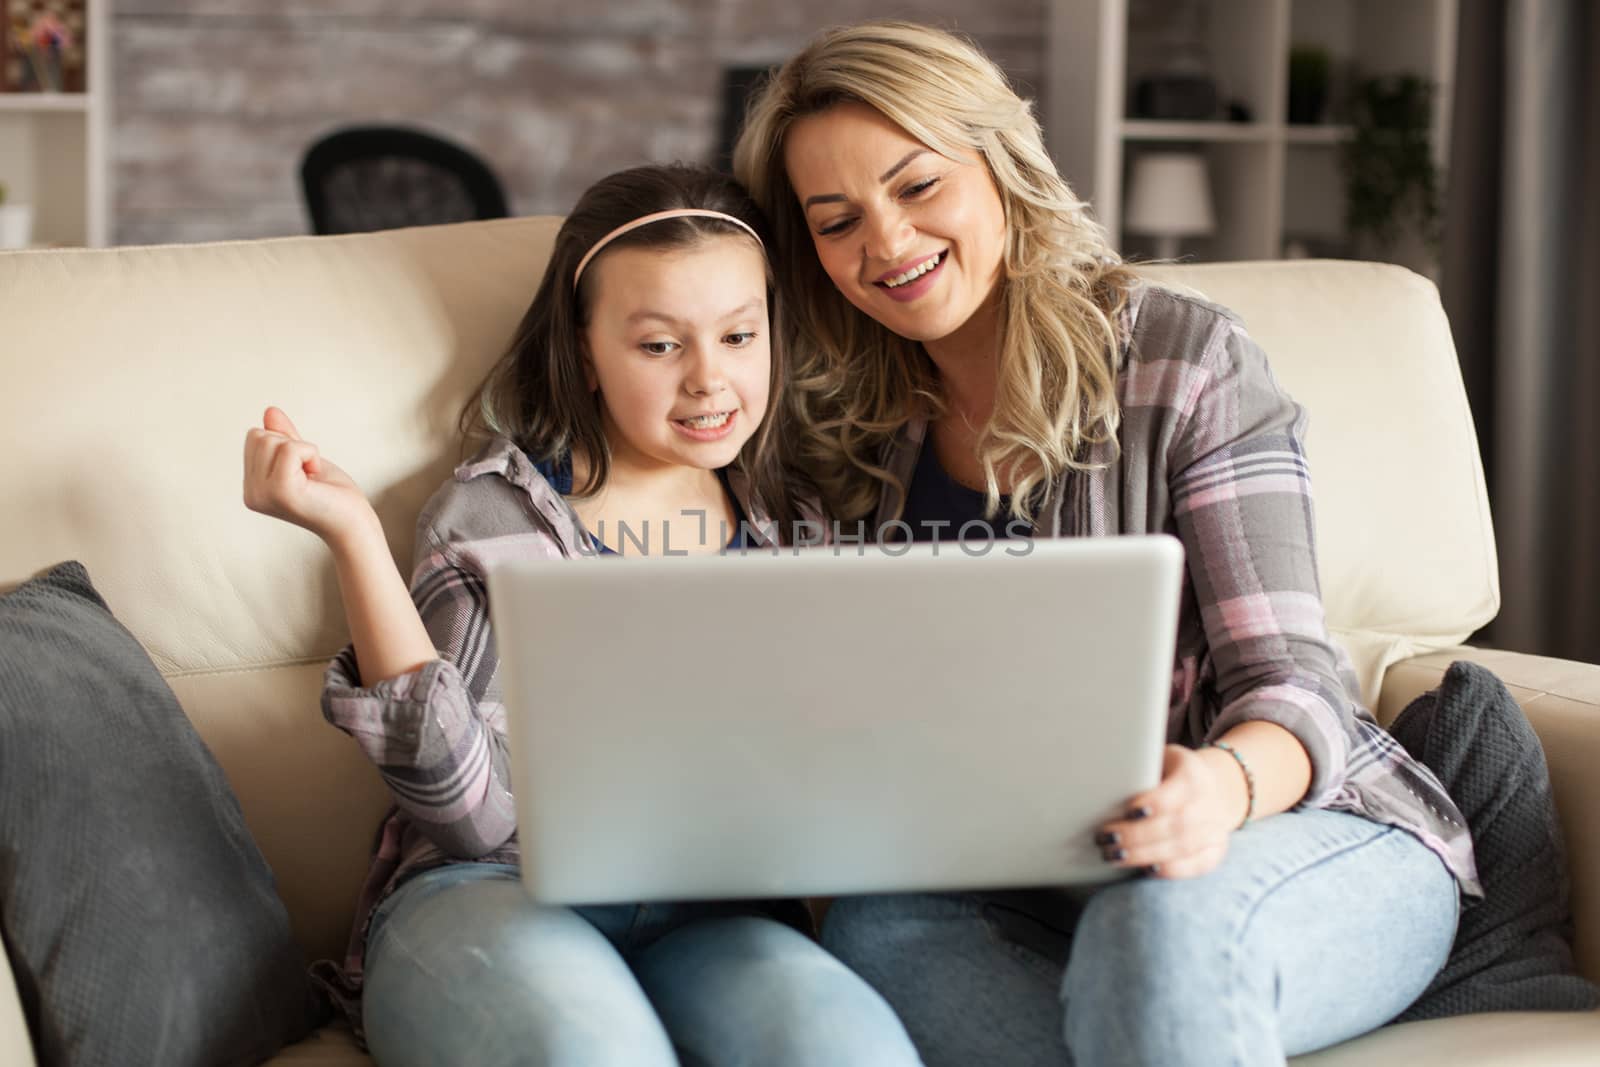 Cheerful young mother and her daughter smiling while surfing on laptop sitting on the couch in living room.